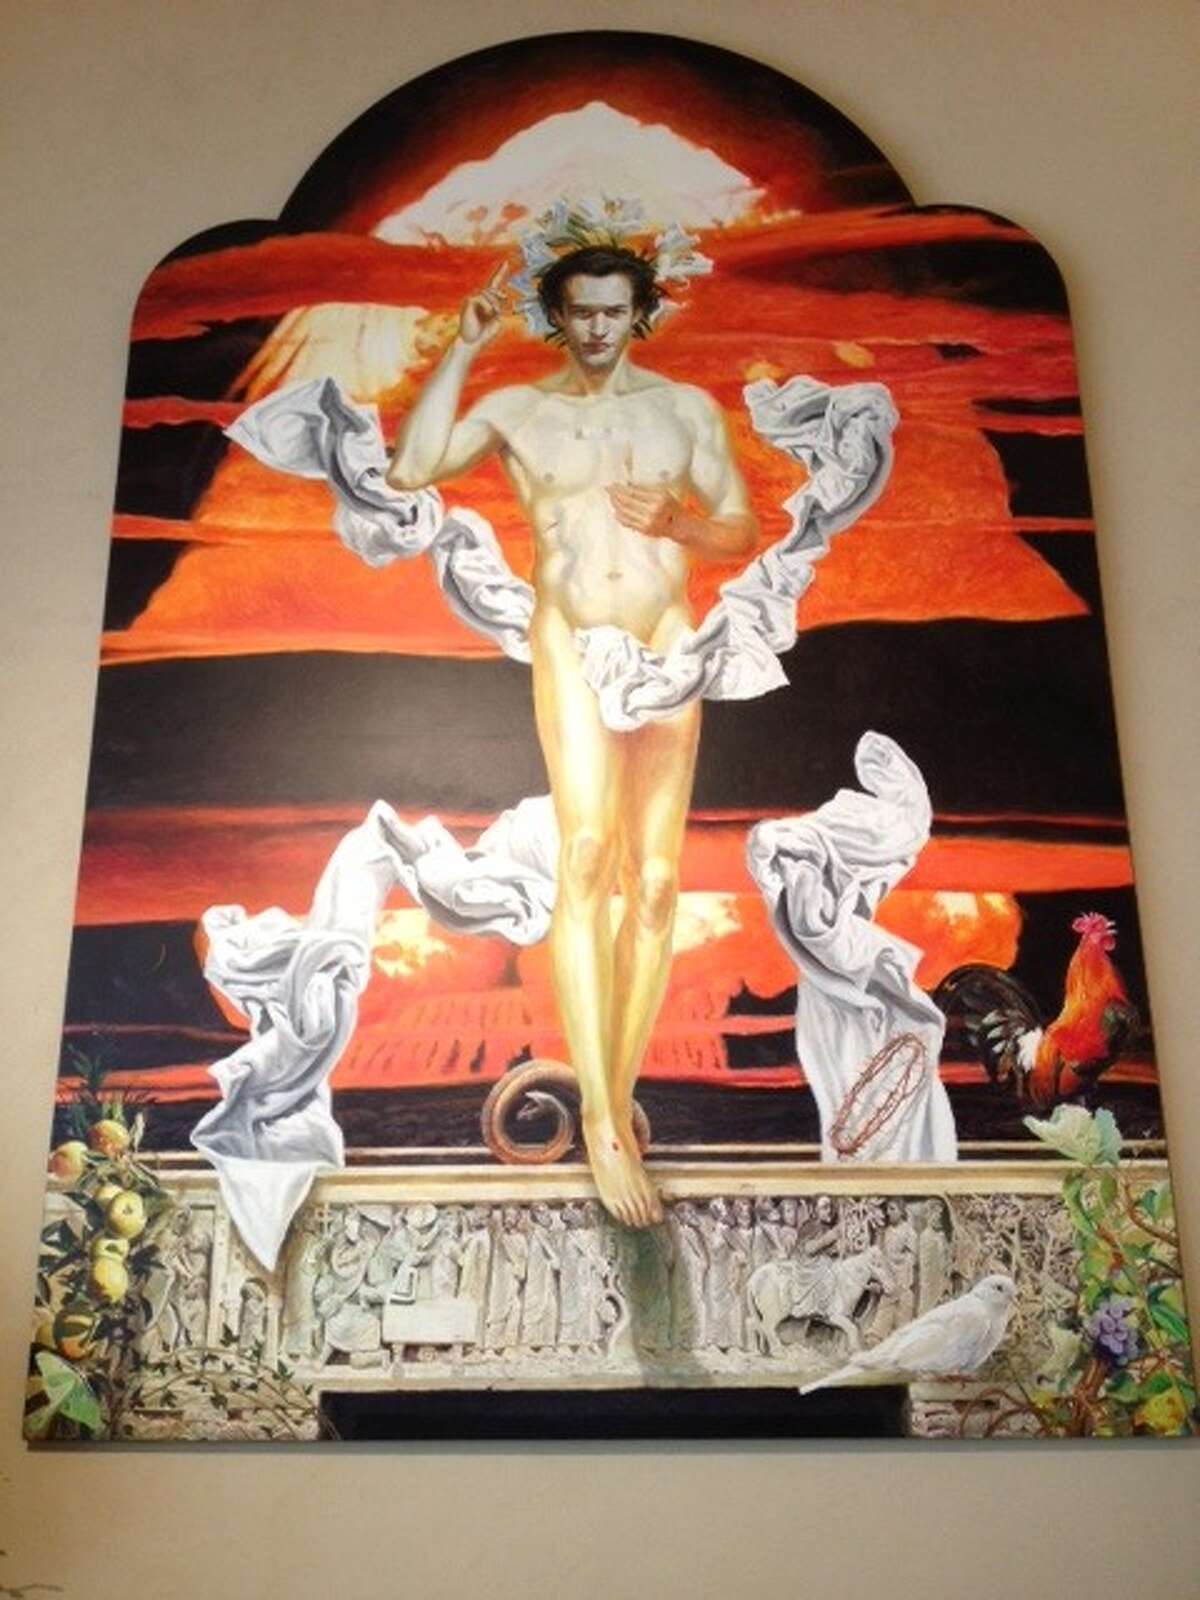 "Resurrection" by Kermit Oliver. The face of Christ is that of Khristian Oliver, the youngest of the Oliver children. He was executed in Texas in 2009.